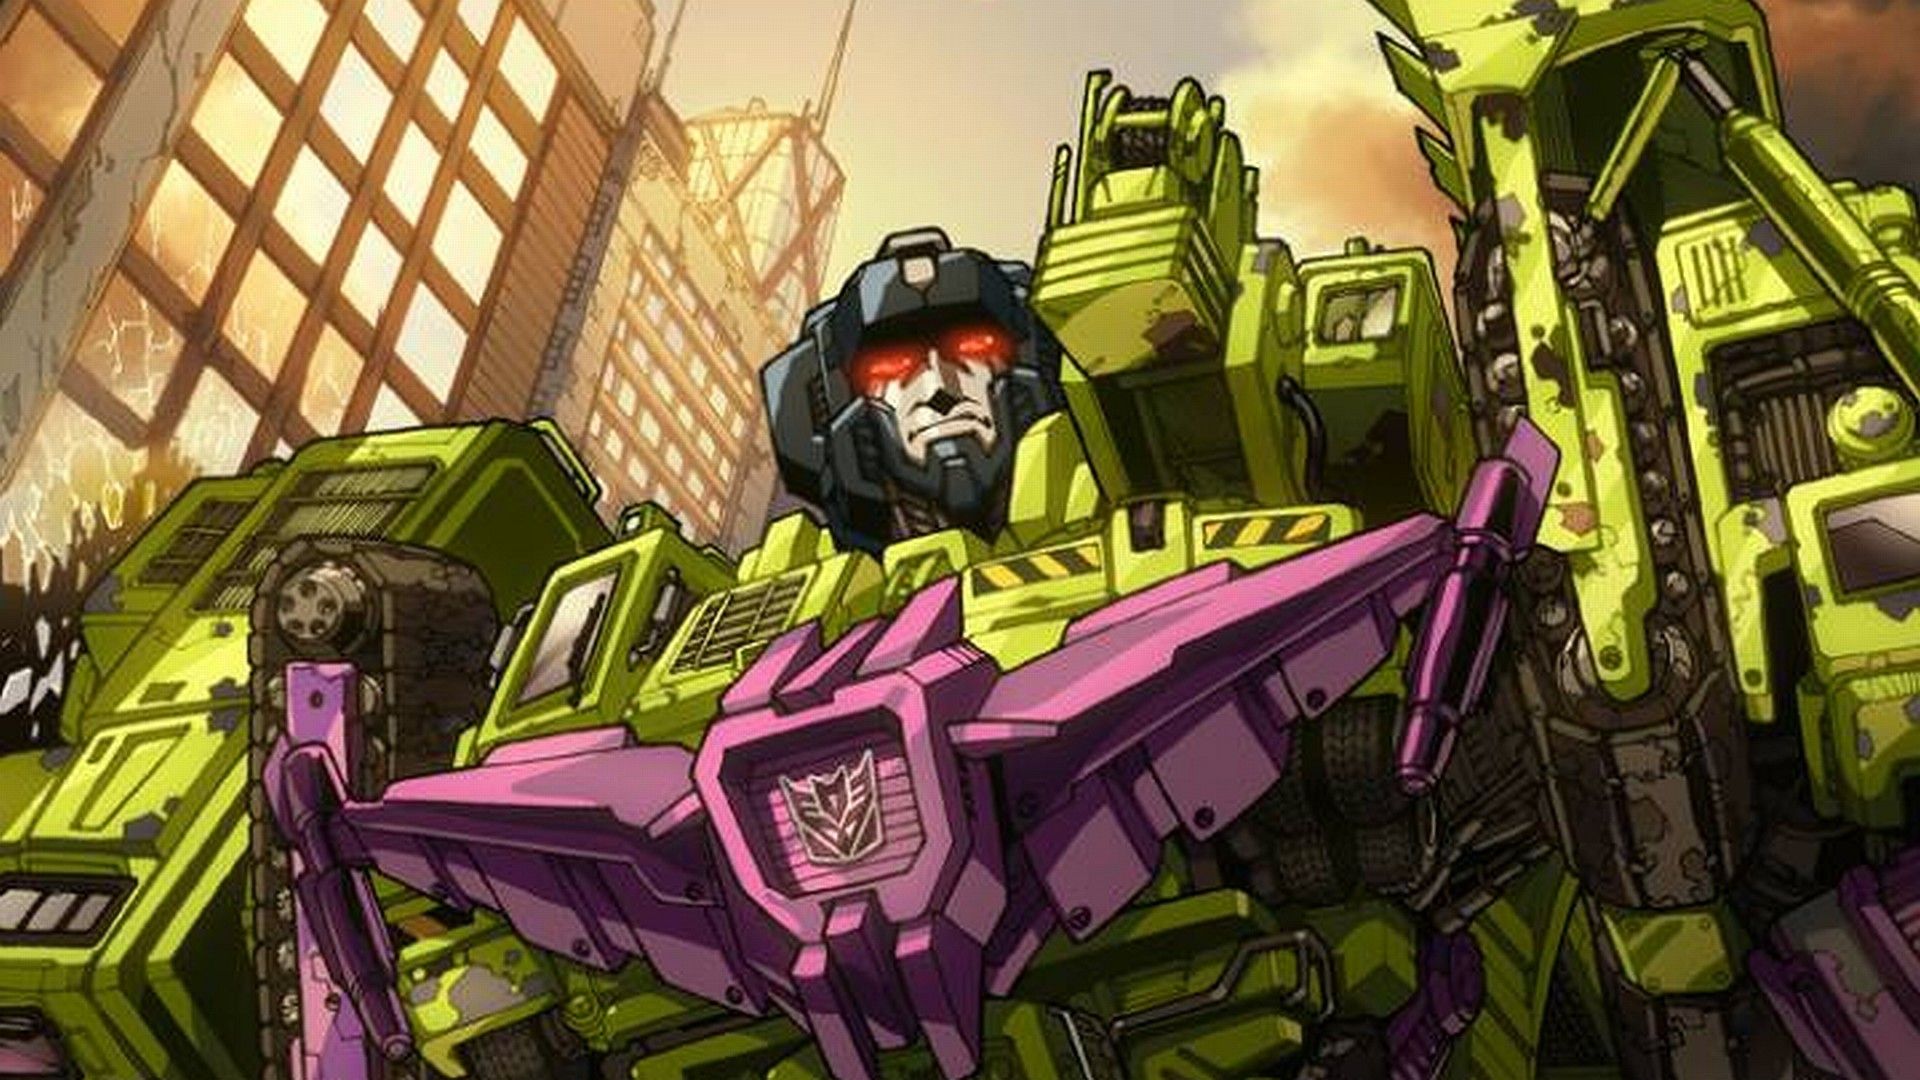 186+ G1 Transformers Wallpapers HD. 